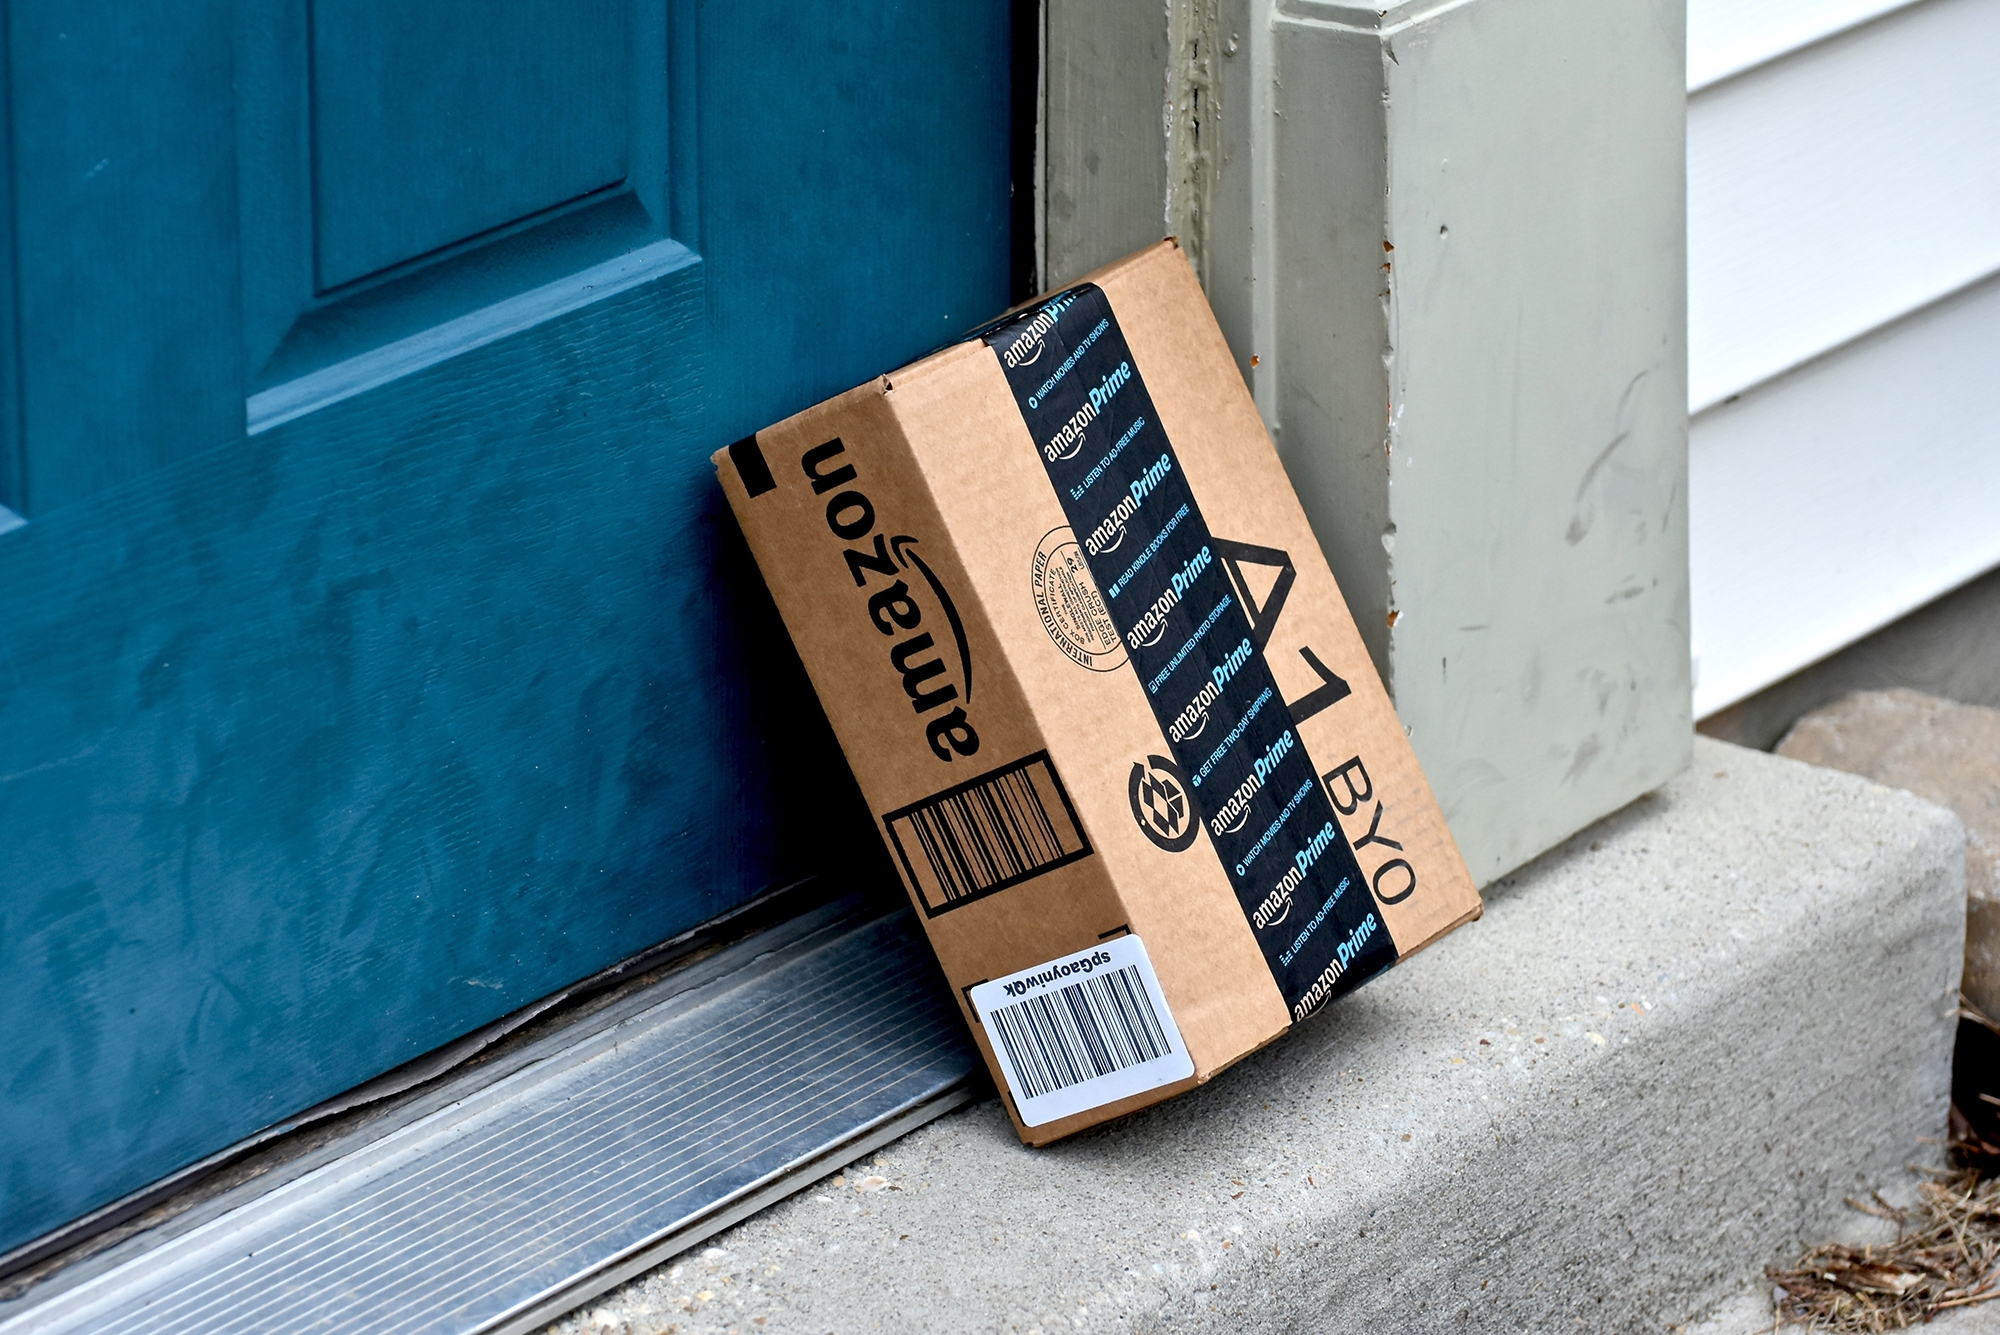 An Amazon package leans against the front door of a house. 